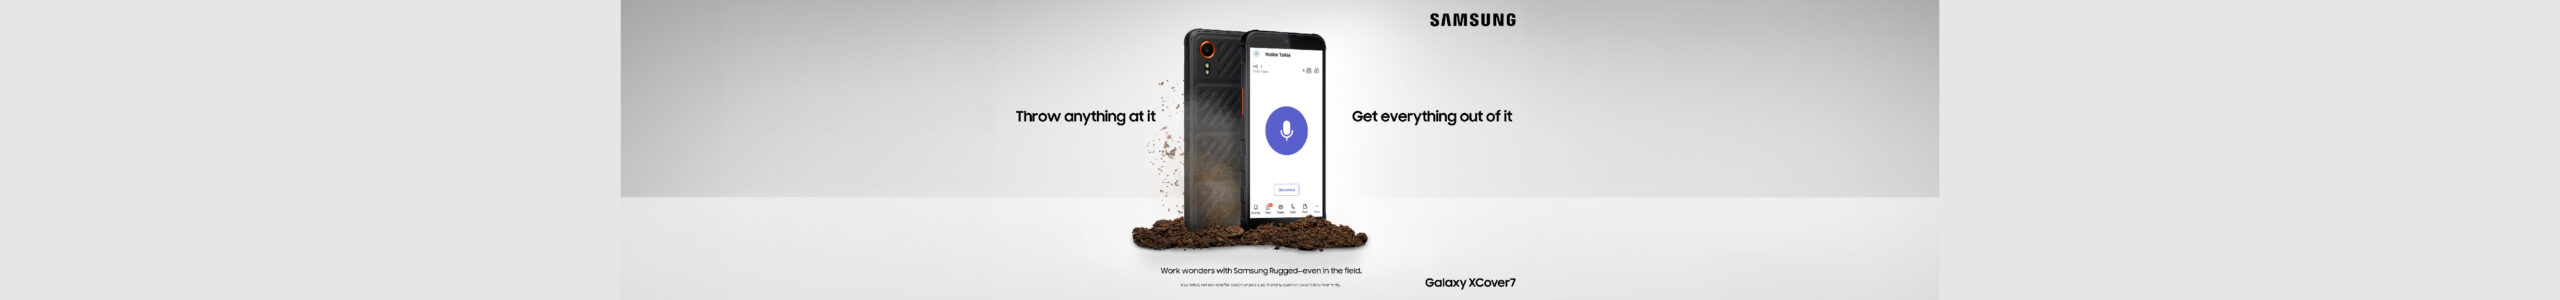 Samsung-XCover-7-Web-Banner